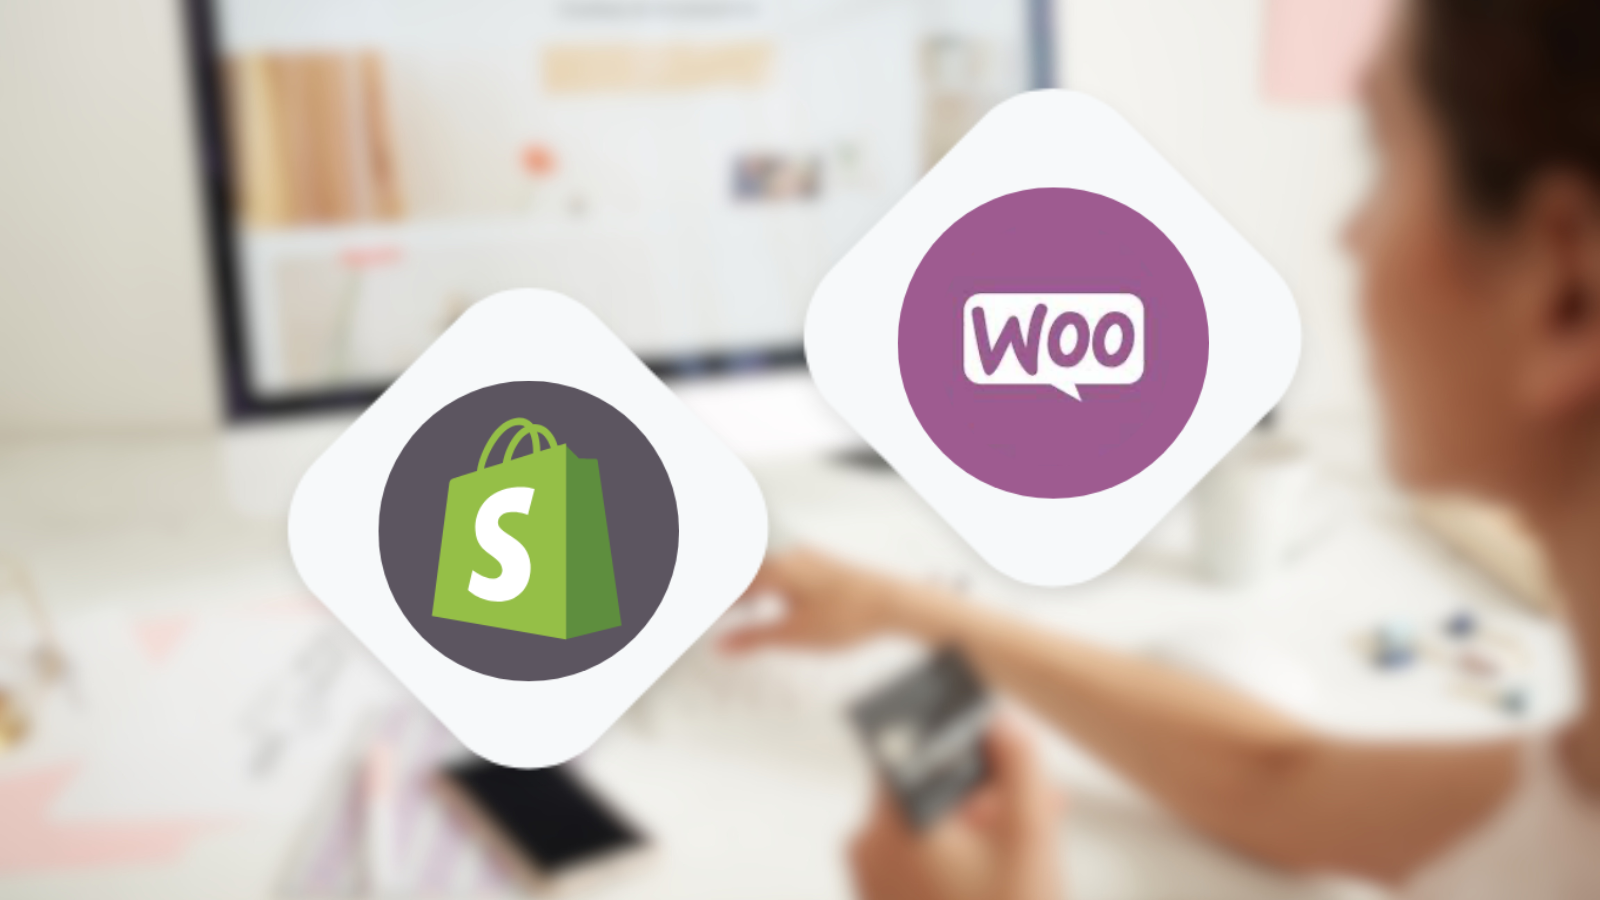 WooCommerce vs Shopify: Which Is Better For Your Online Store?